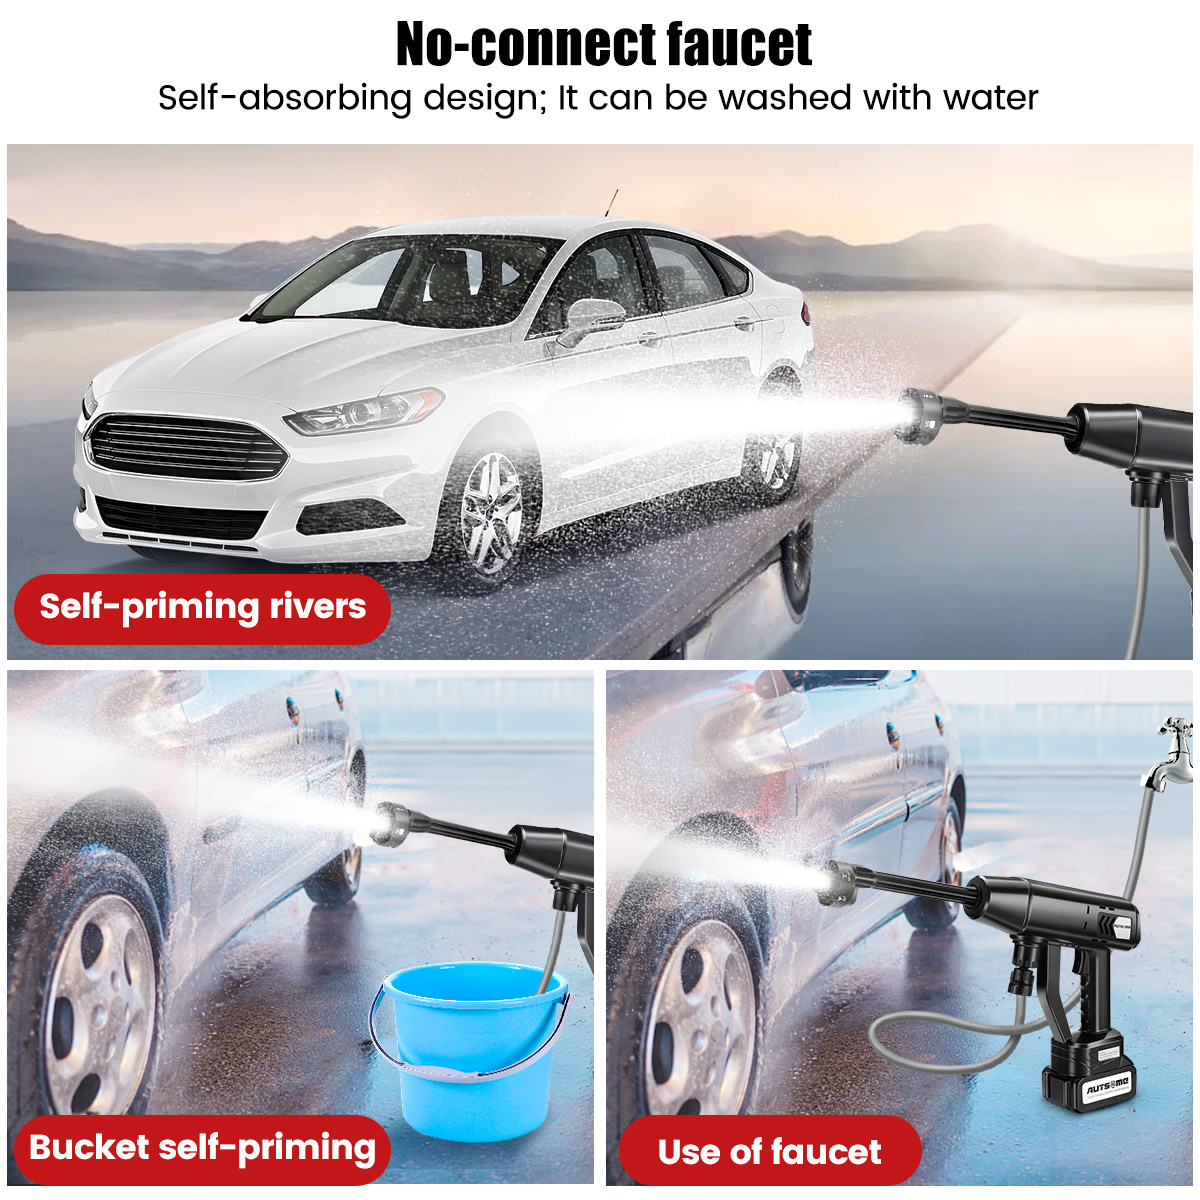 AUTSOME 15000mAh 755Motor Cordless High Pressure Car Washer Spray Water Pump Portable Car Wash Pressure Cleaner Cleaning Machine